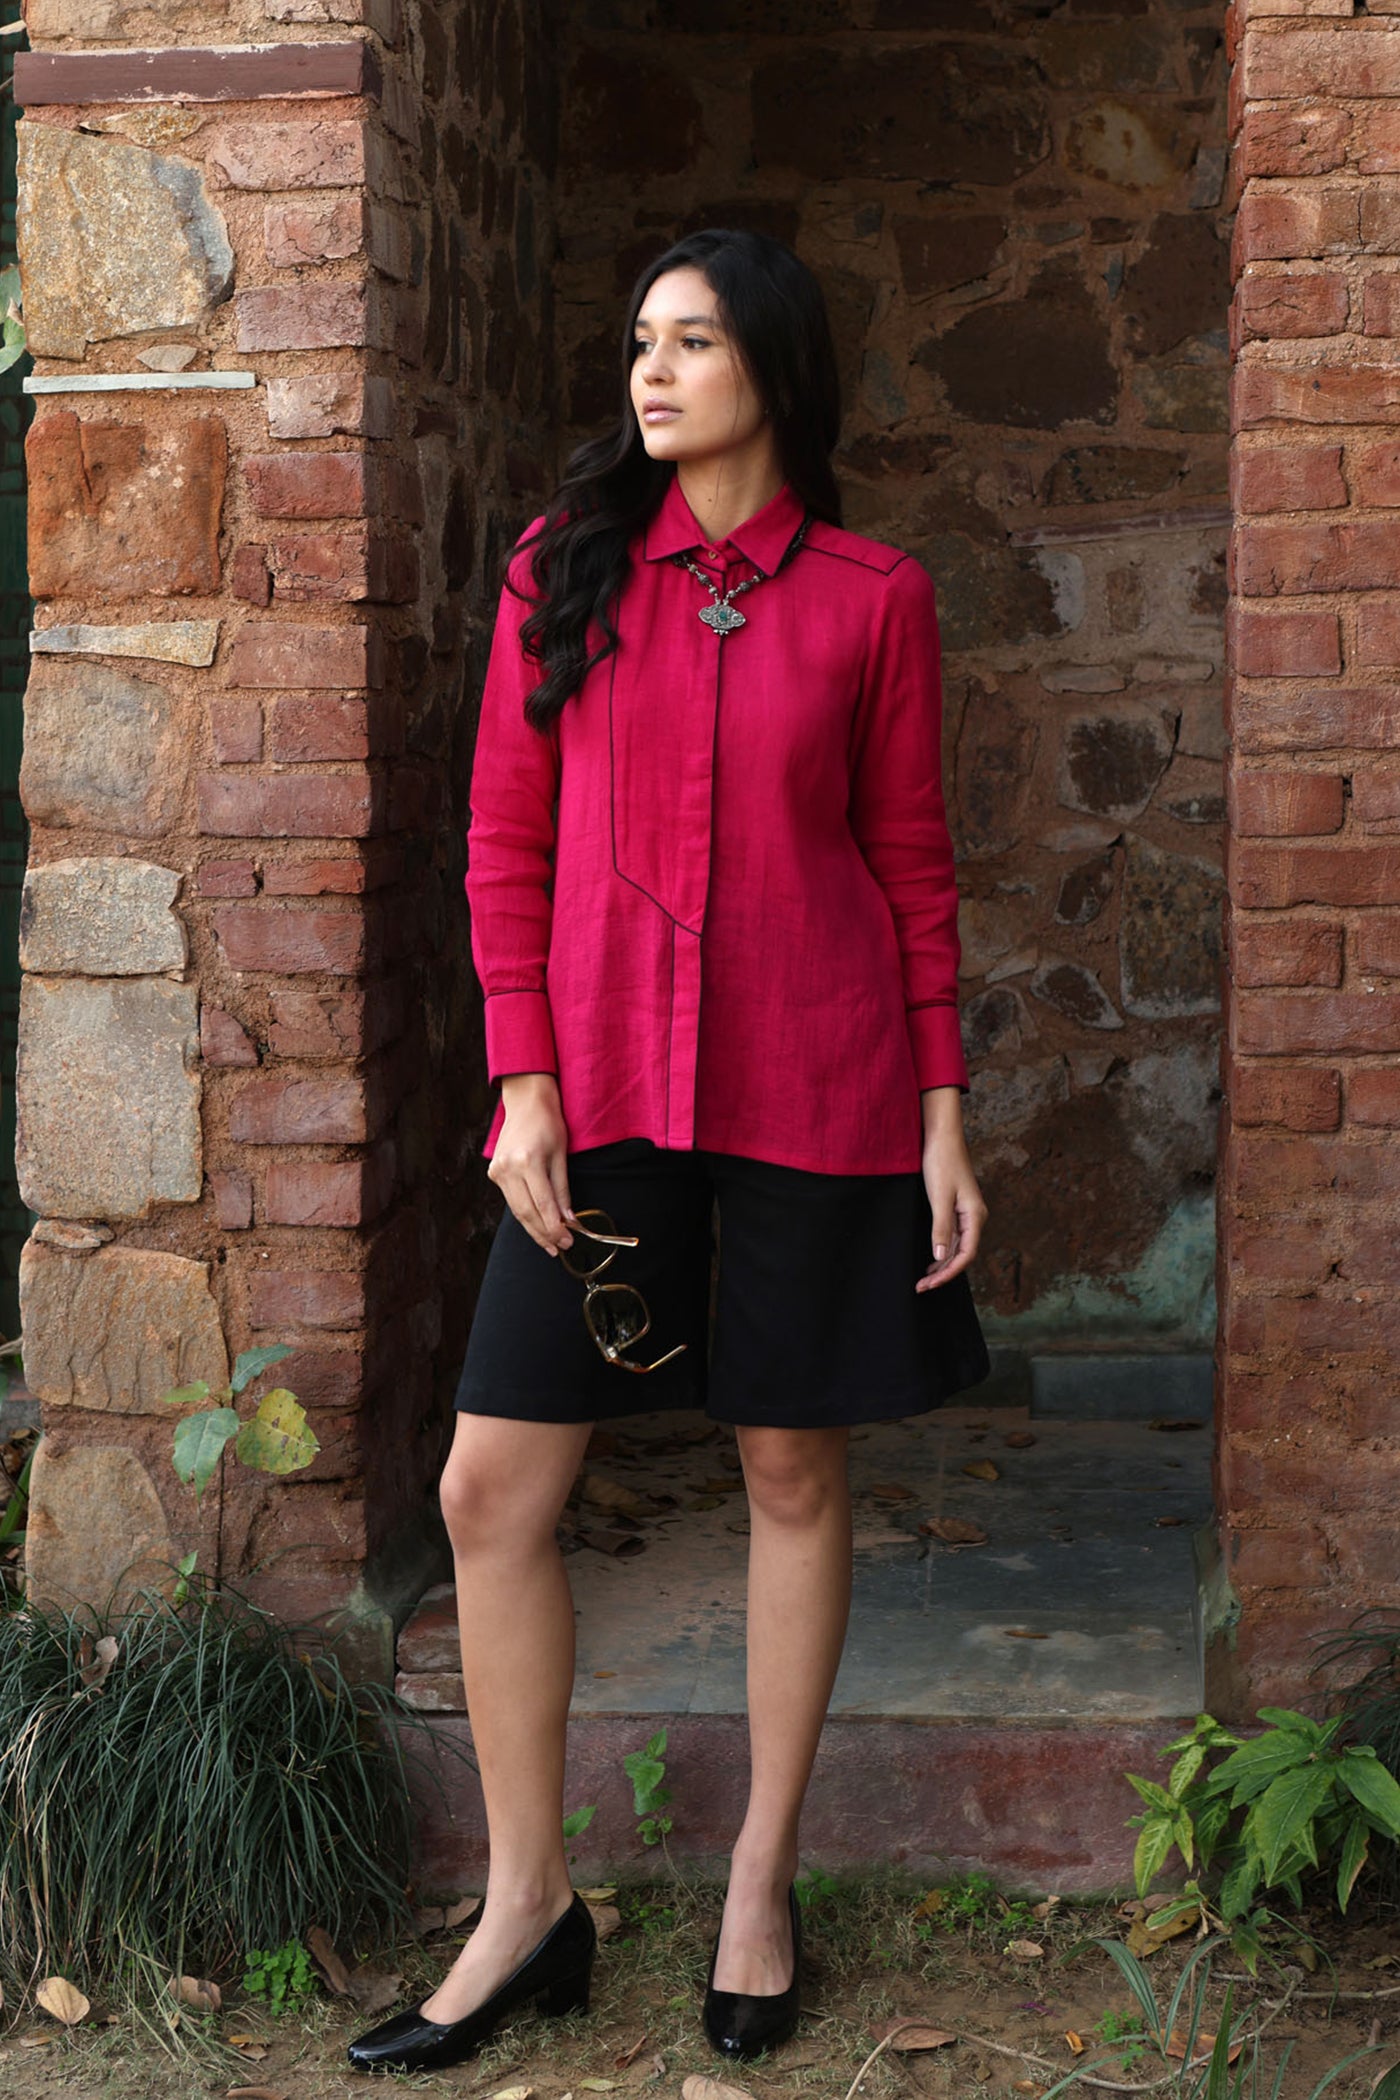 Bright-Pink Pure Linen Collared Front-Open Short Blouse With Contrast Edgings